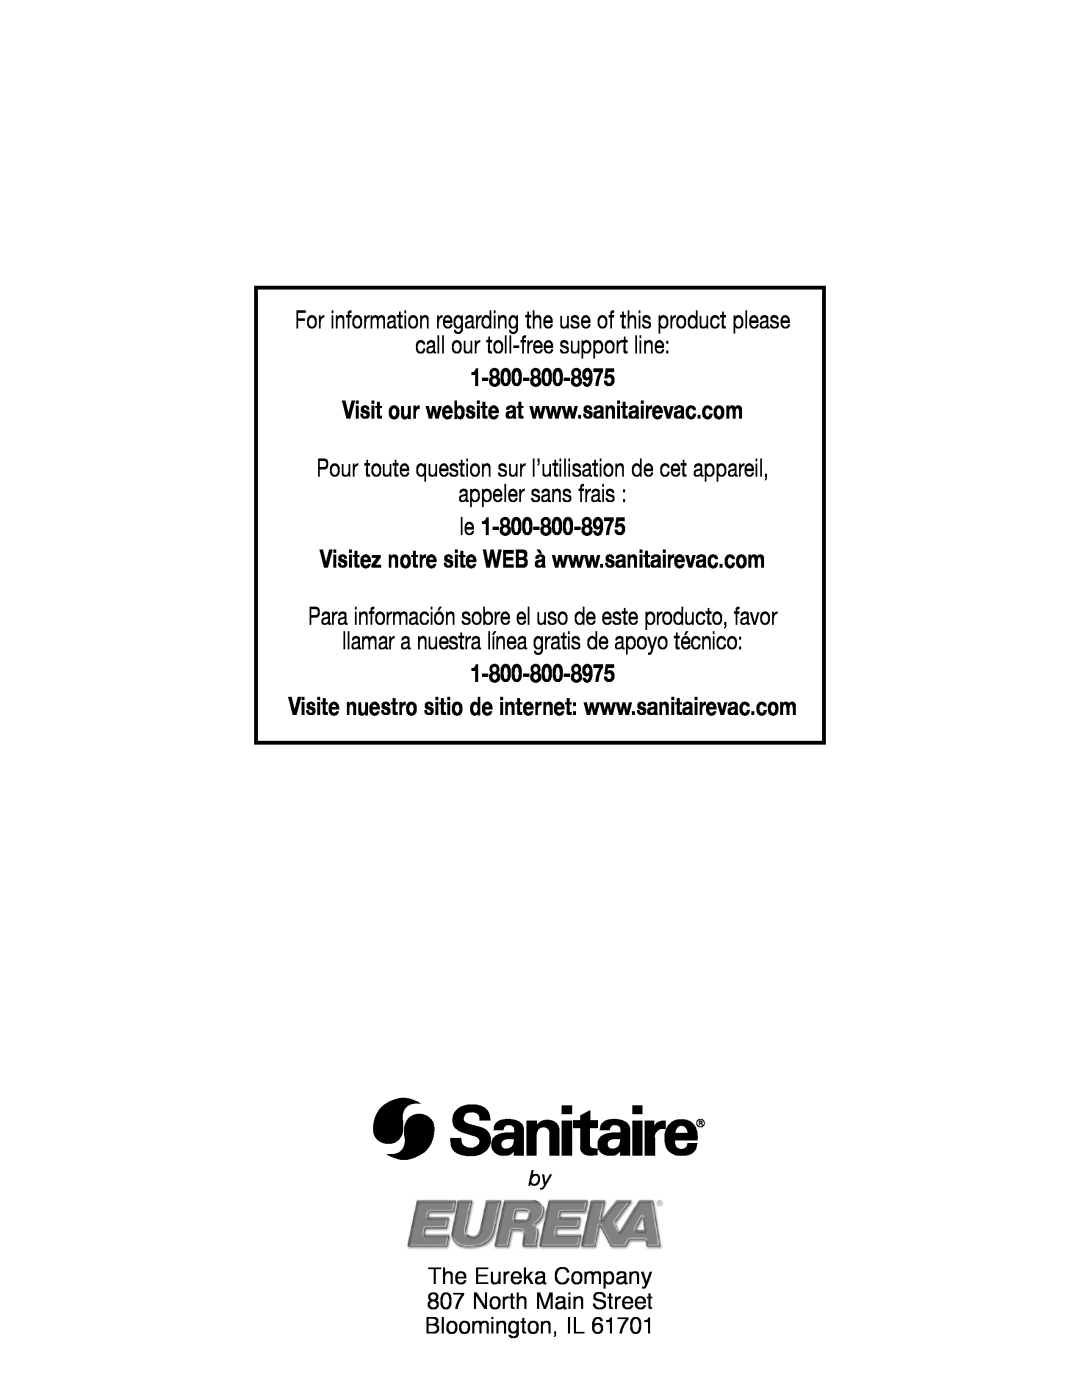 Sanitaire SC6600 manual For information regarding the use of this product please, call our toll-free support line 